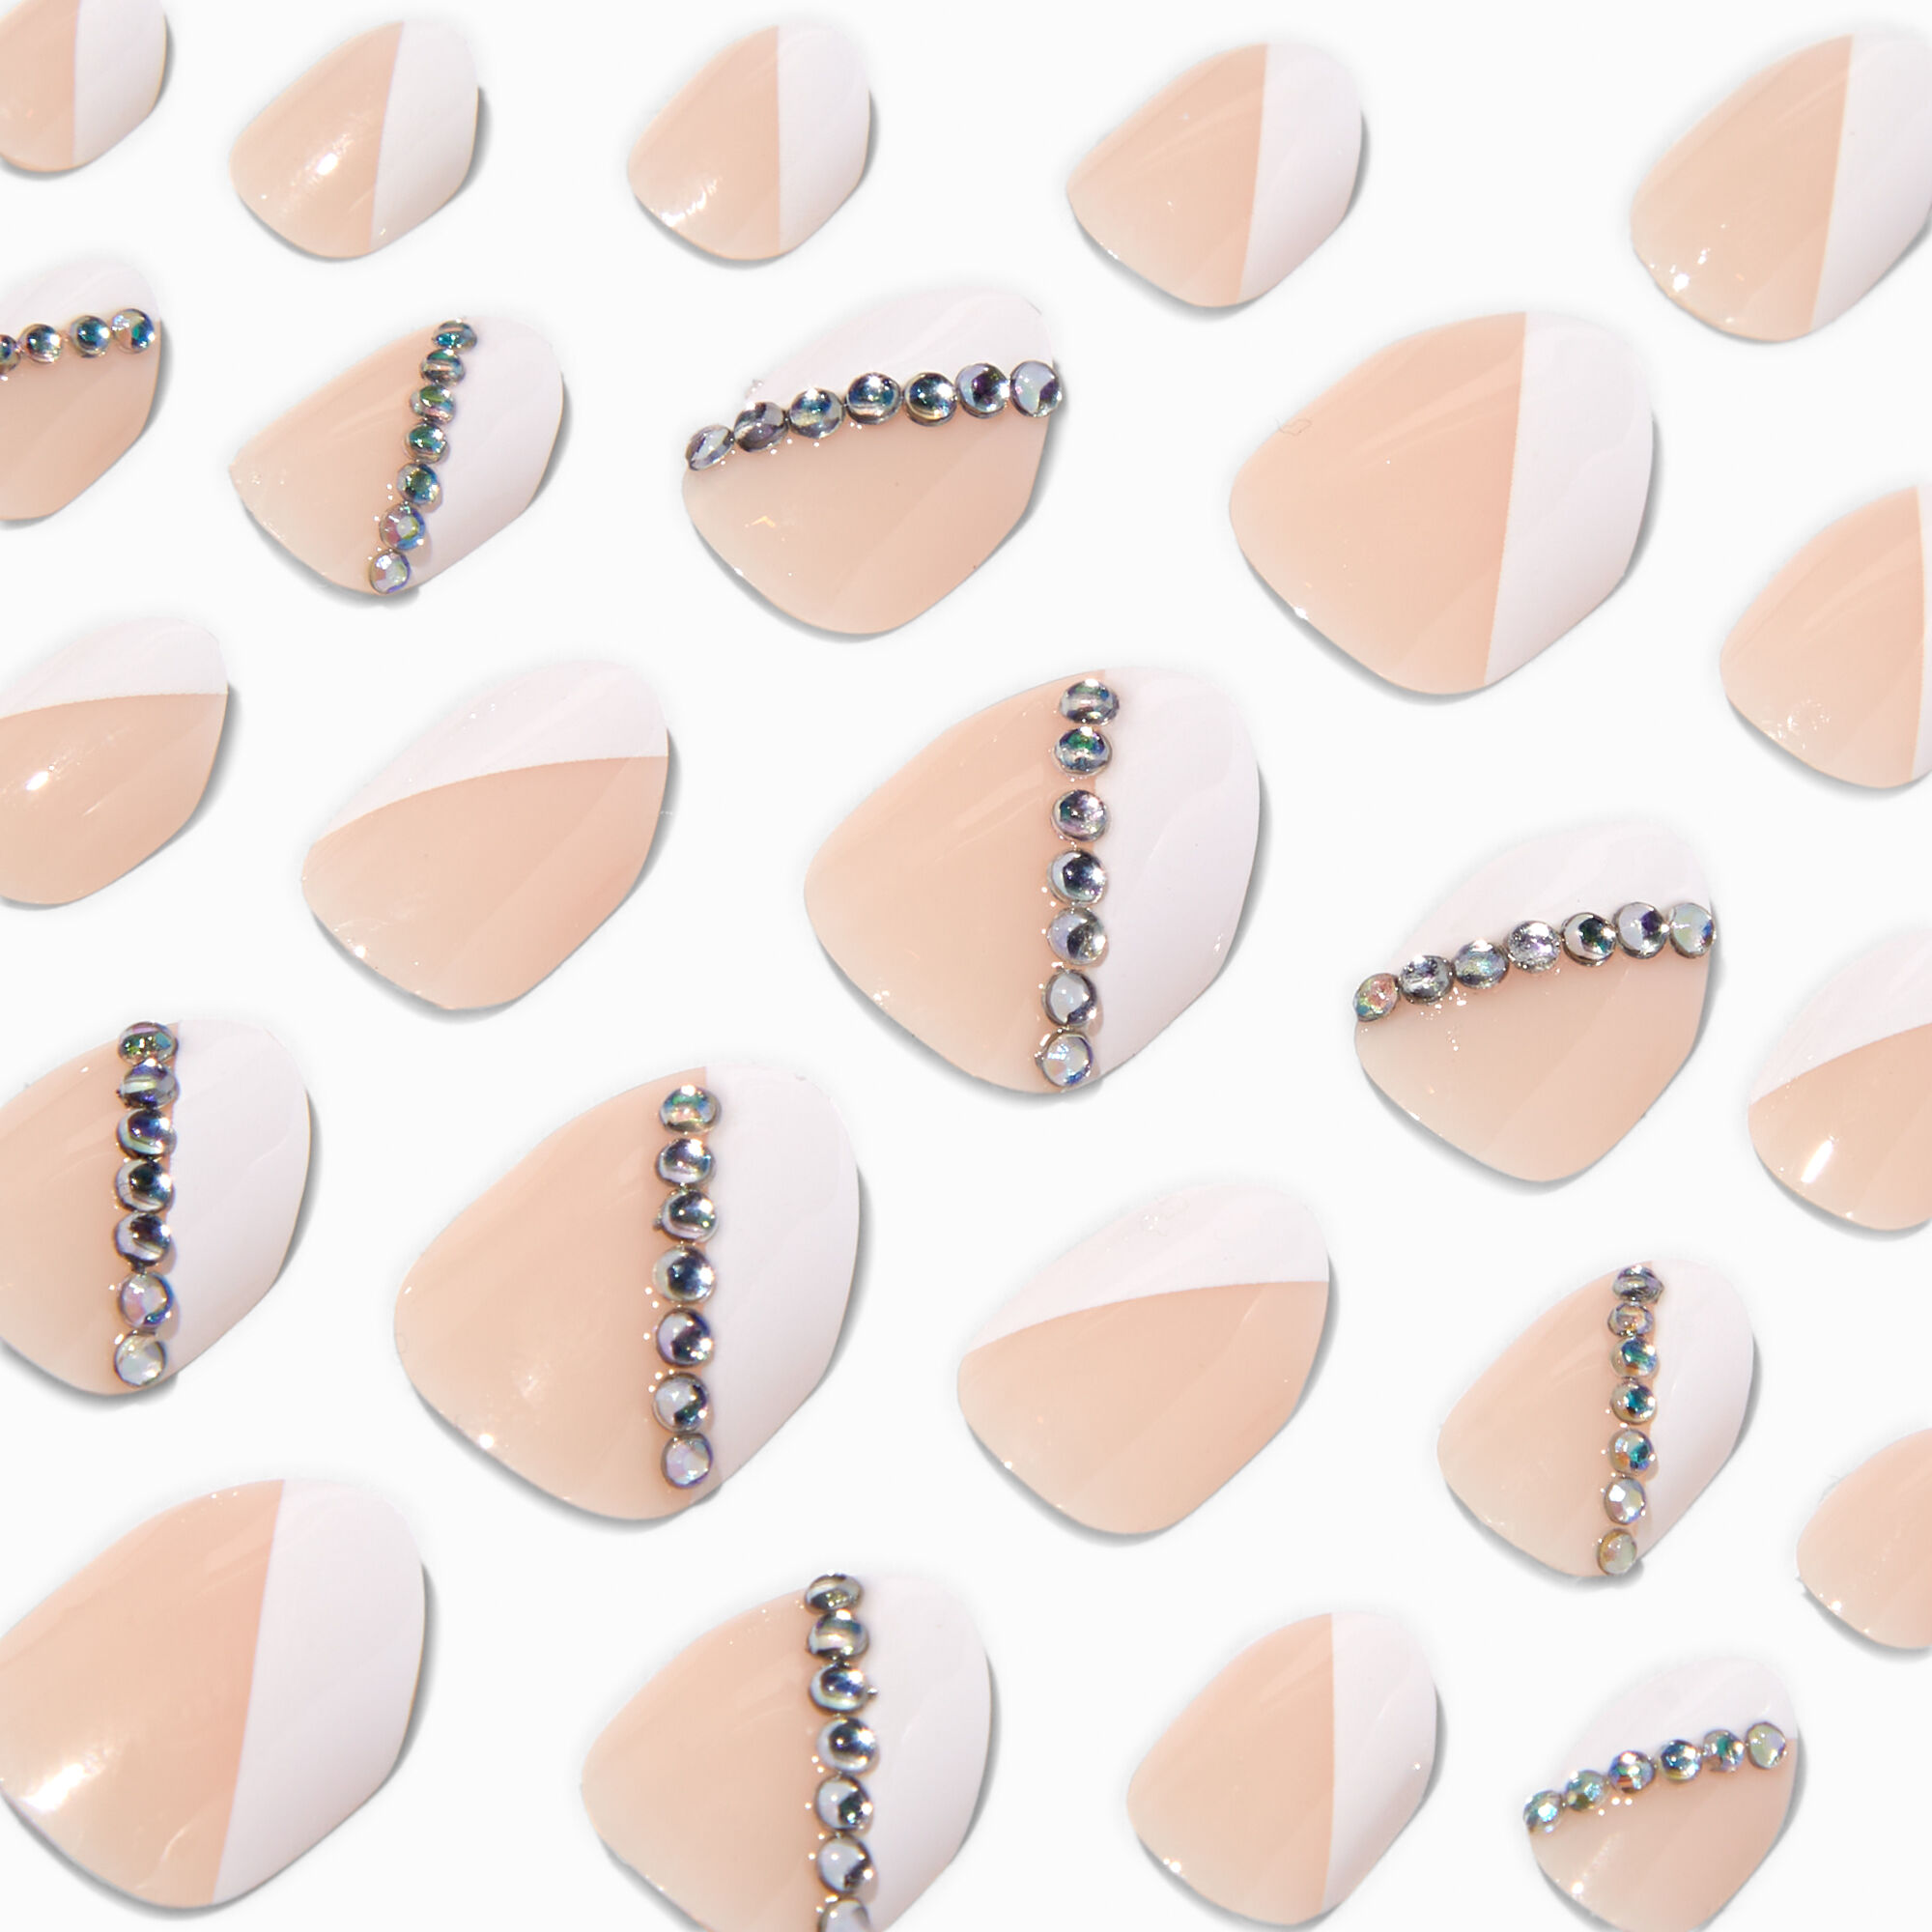 View Claires Geometric Gem French Tip Stiletto Press On Vegan Faux Nail Set 24 Pack information